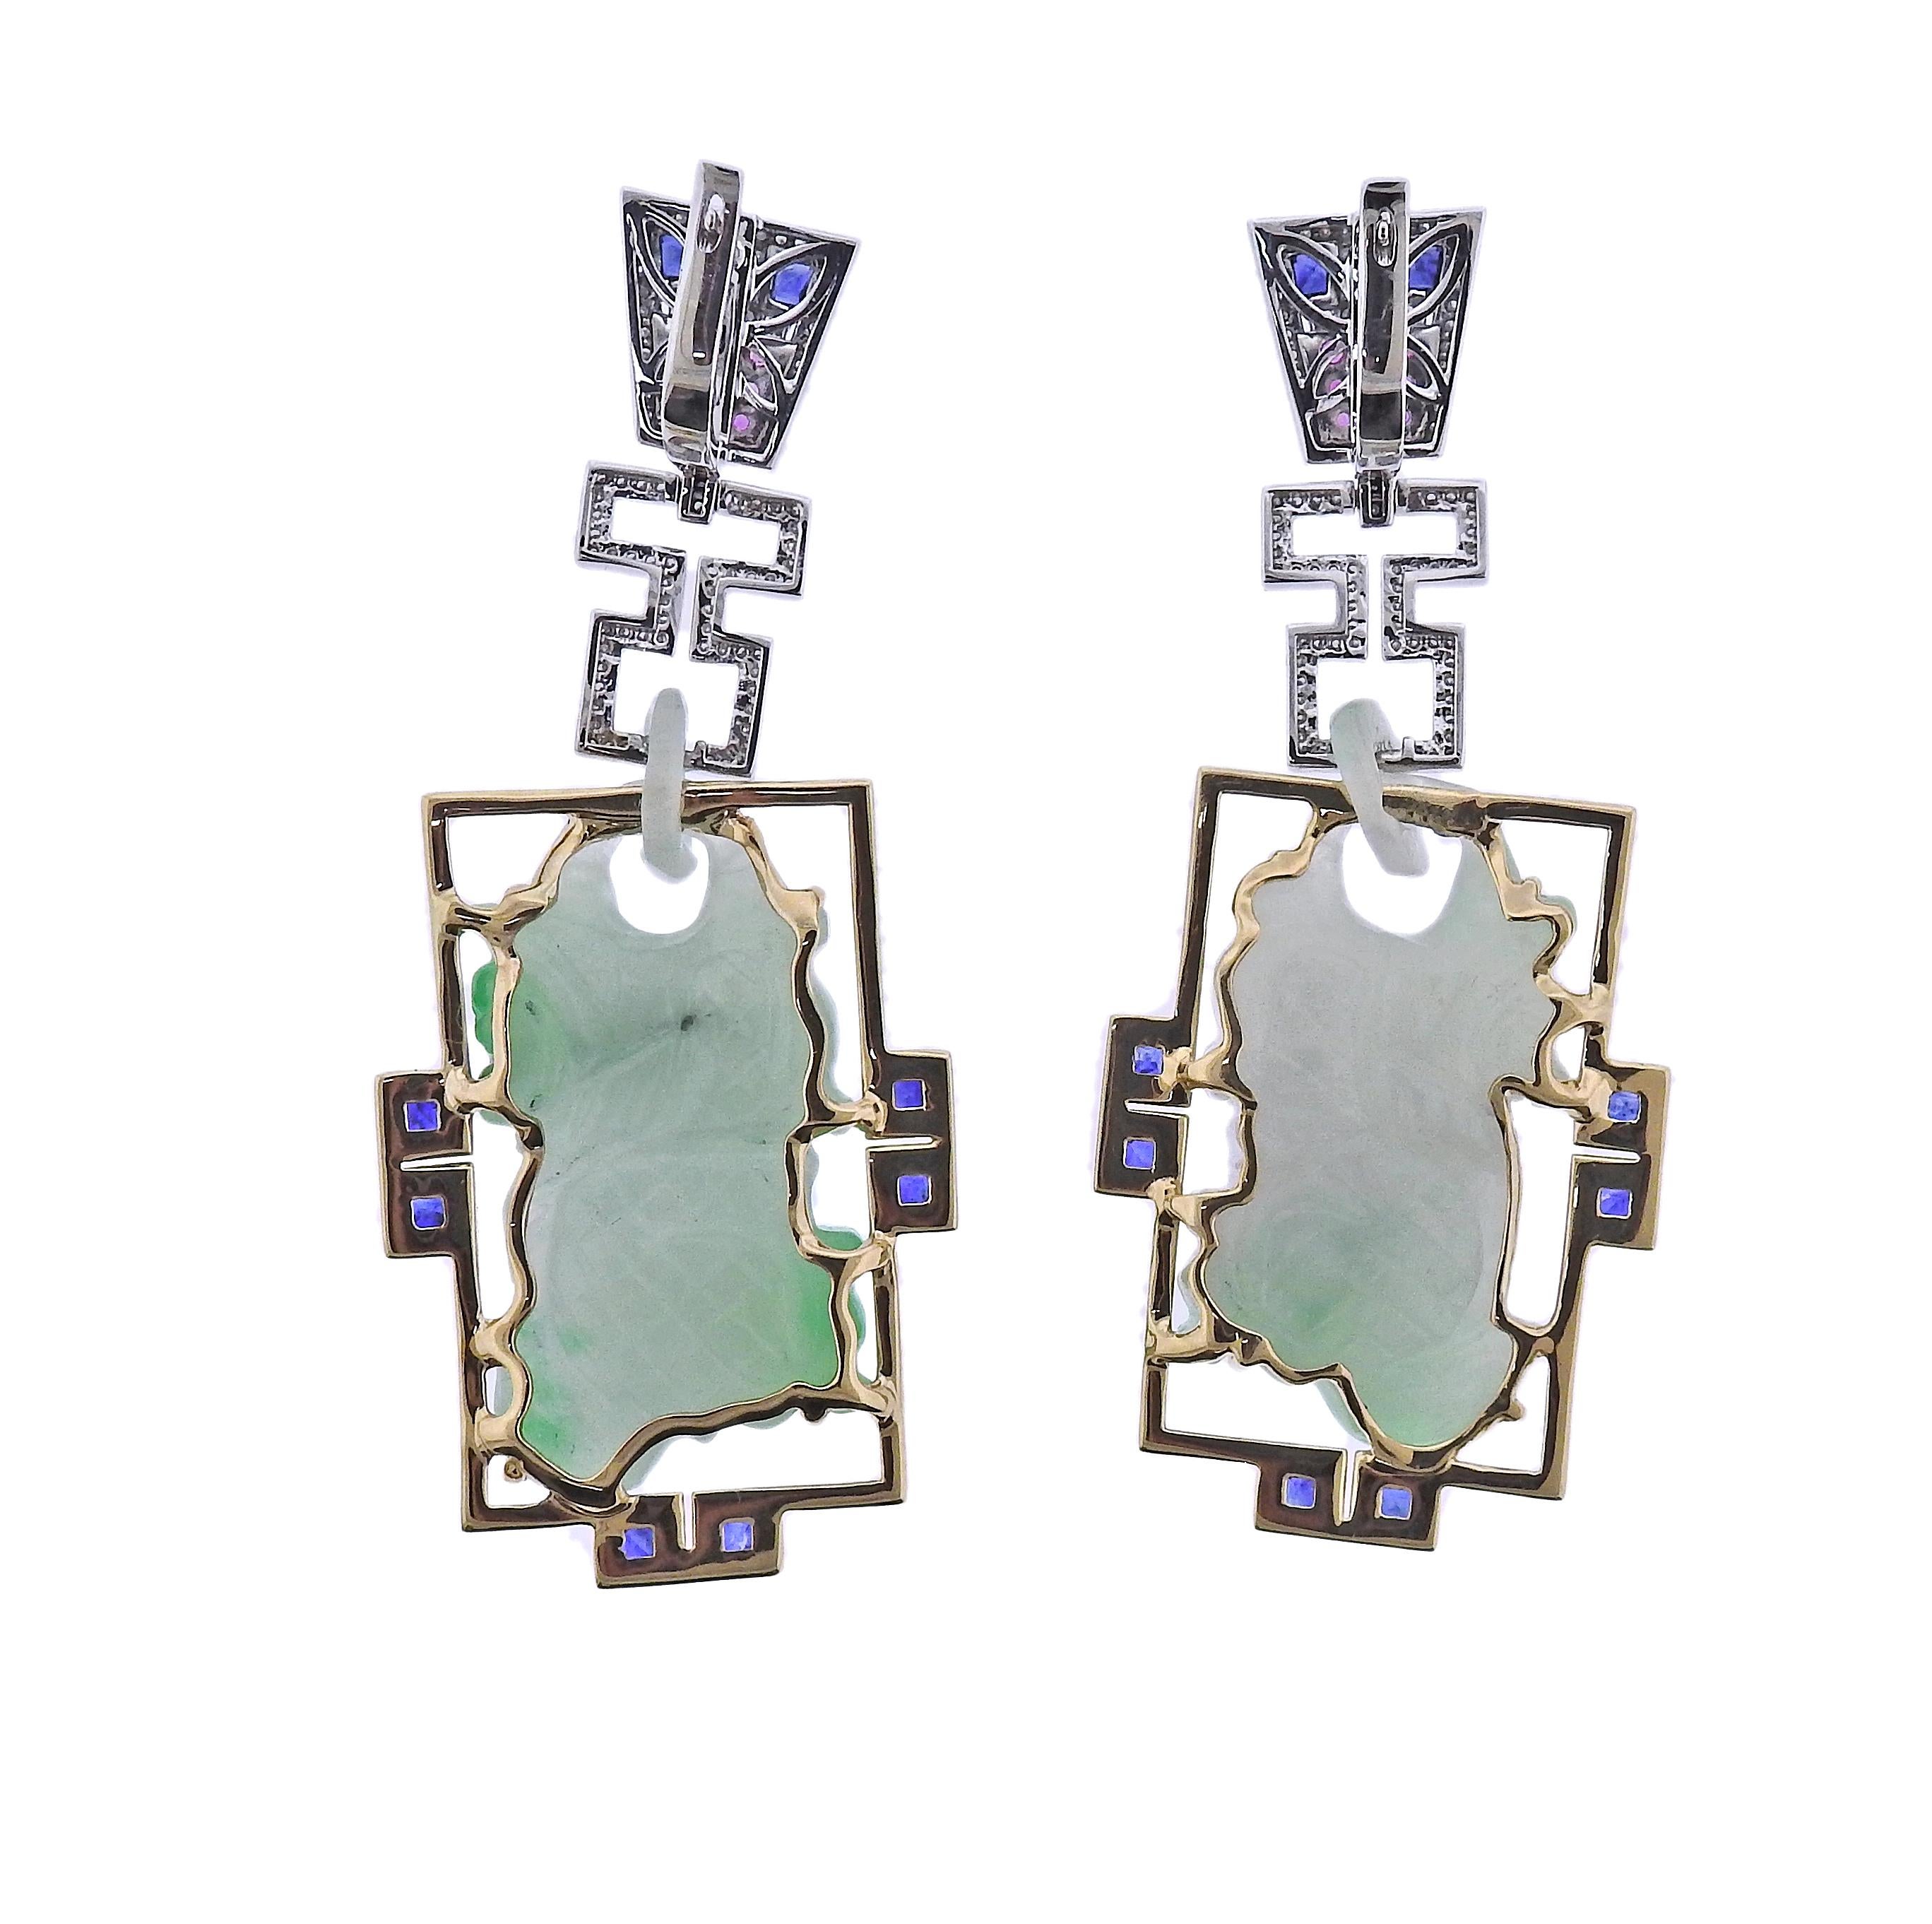 Pair of long 14k gold drop earrings, with 85.42ctw carved jadeite jade, pink and blue sapphires and 0.43ctw diamonds. Earrings are 70mm x 28mm. Marked 585. Weight - 35.8 grams.